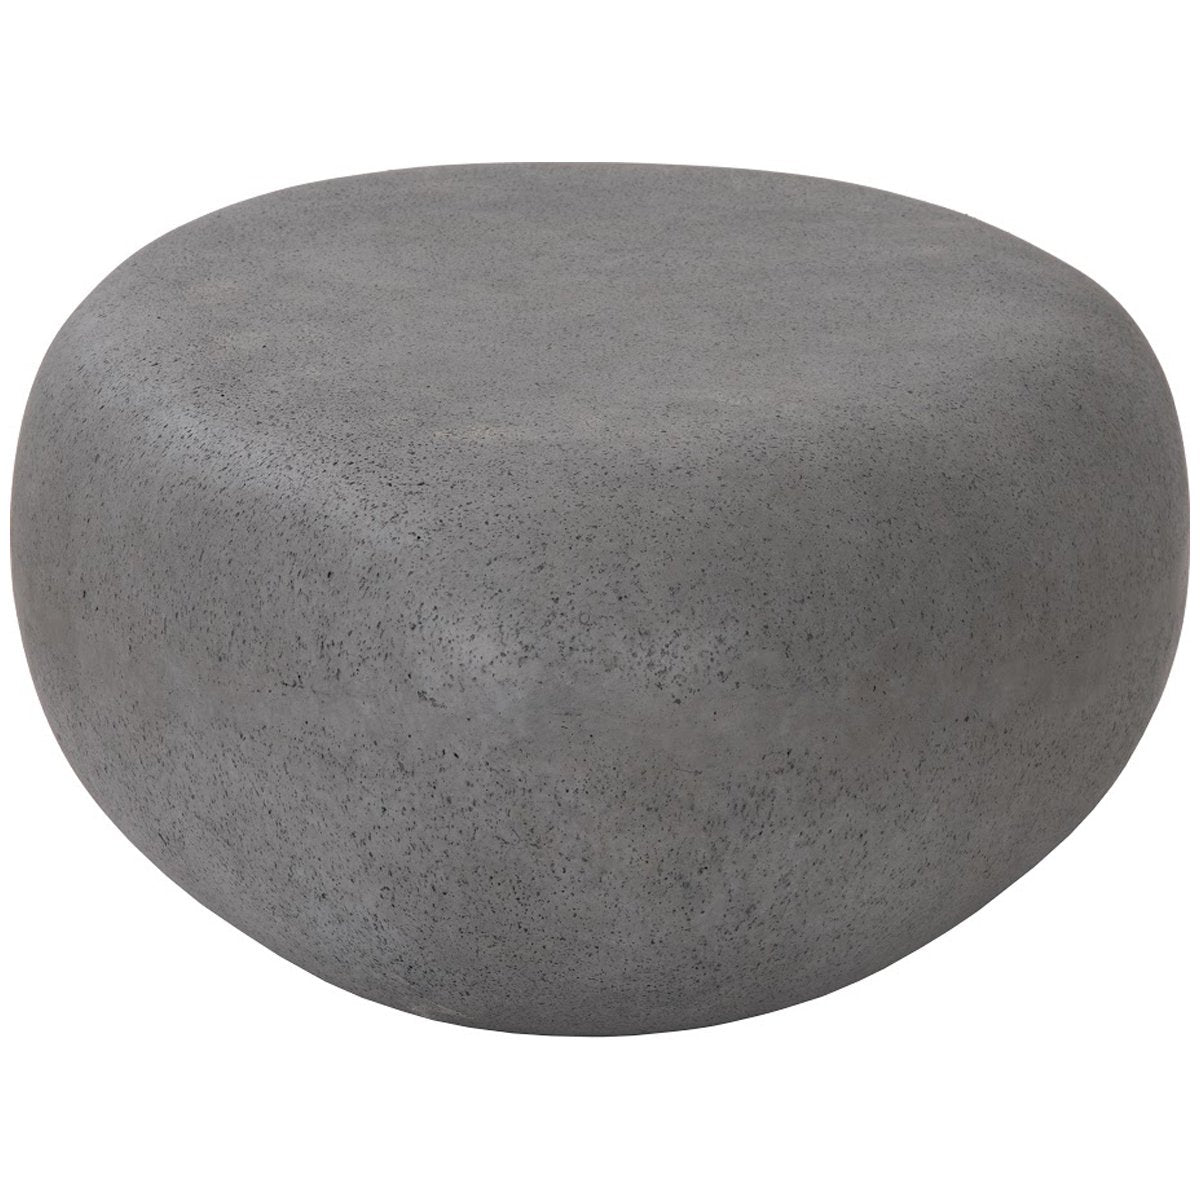 Phillips Collection River Stone Resin Outdoor Coffee Table